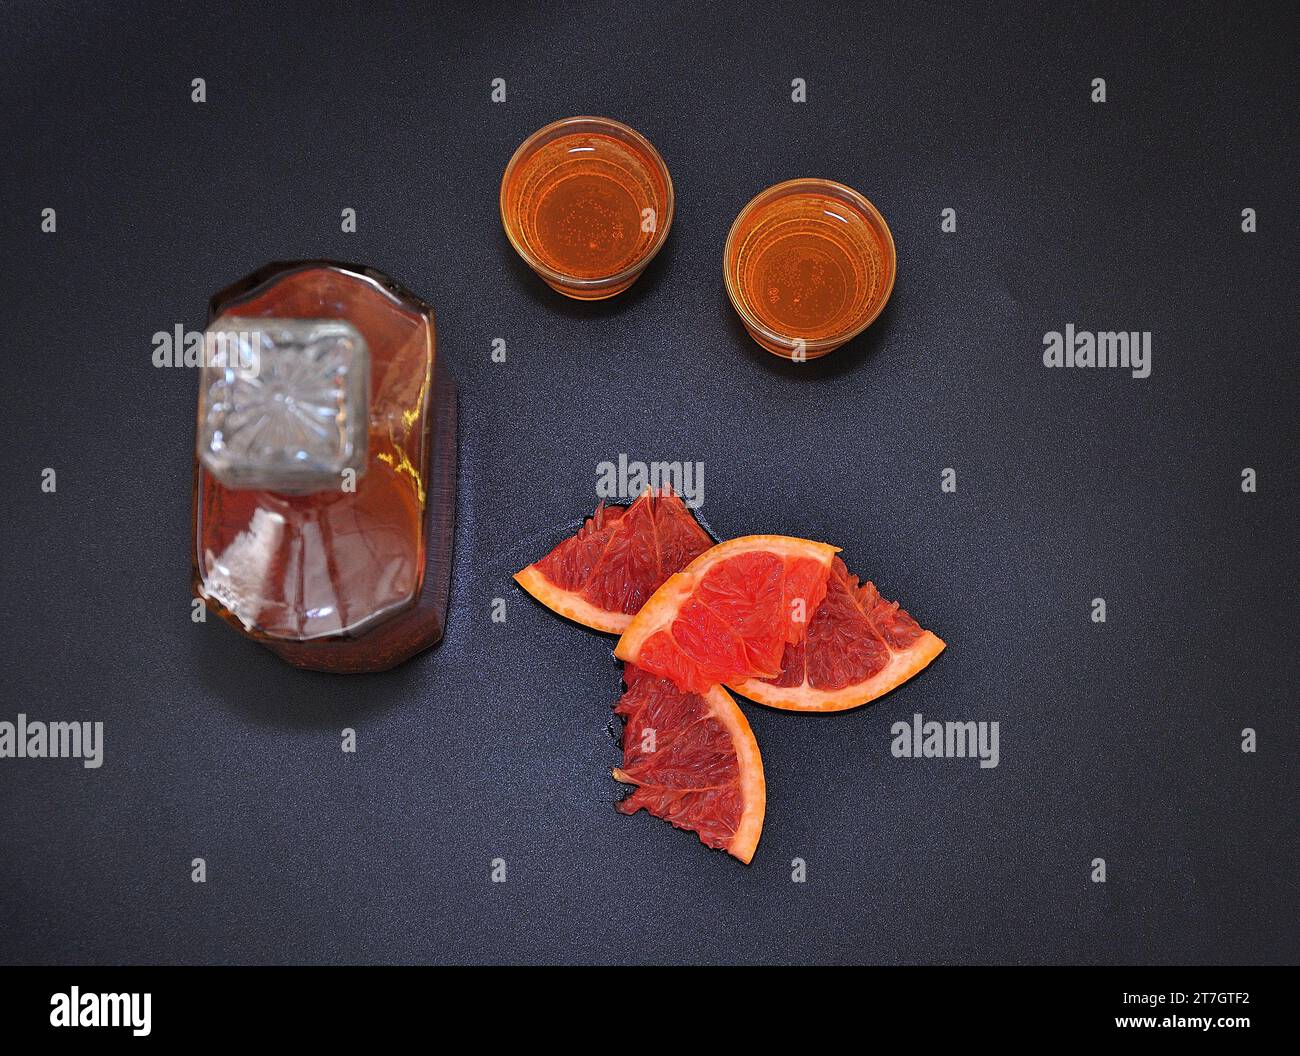 Grapefruit liqueur on a black background, pieces of ripe citrus, a glass decanter and two glasses of strong alcohol on a black background. Top view, f Stock Photo